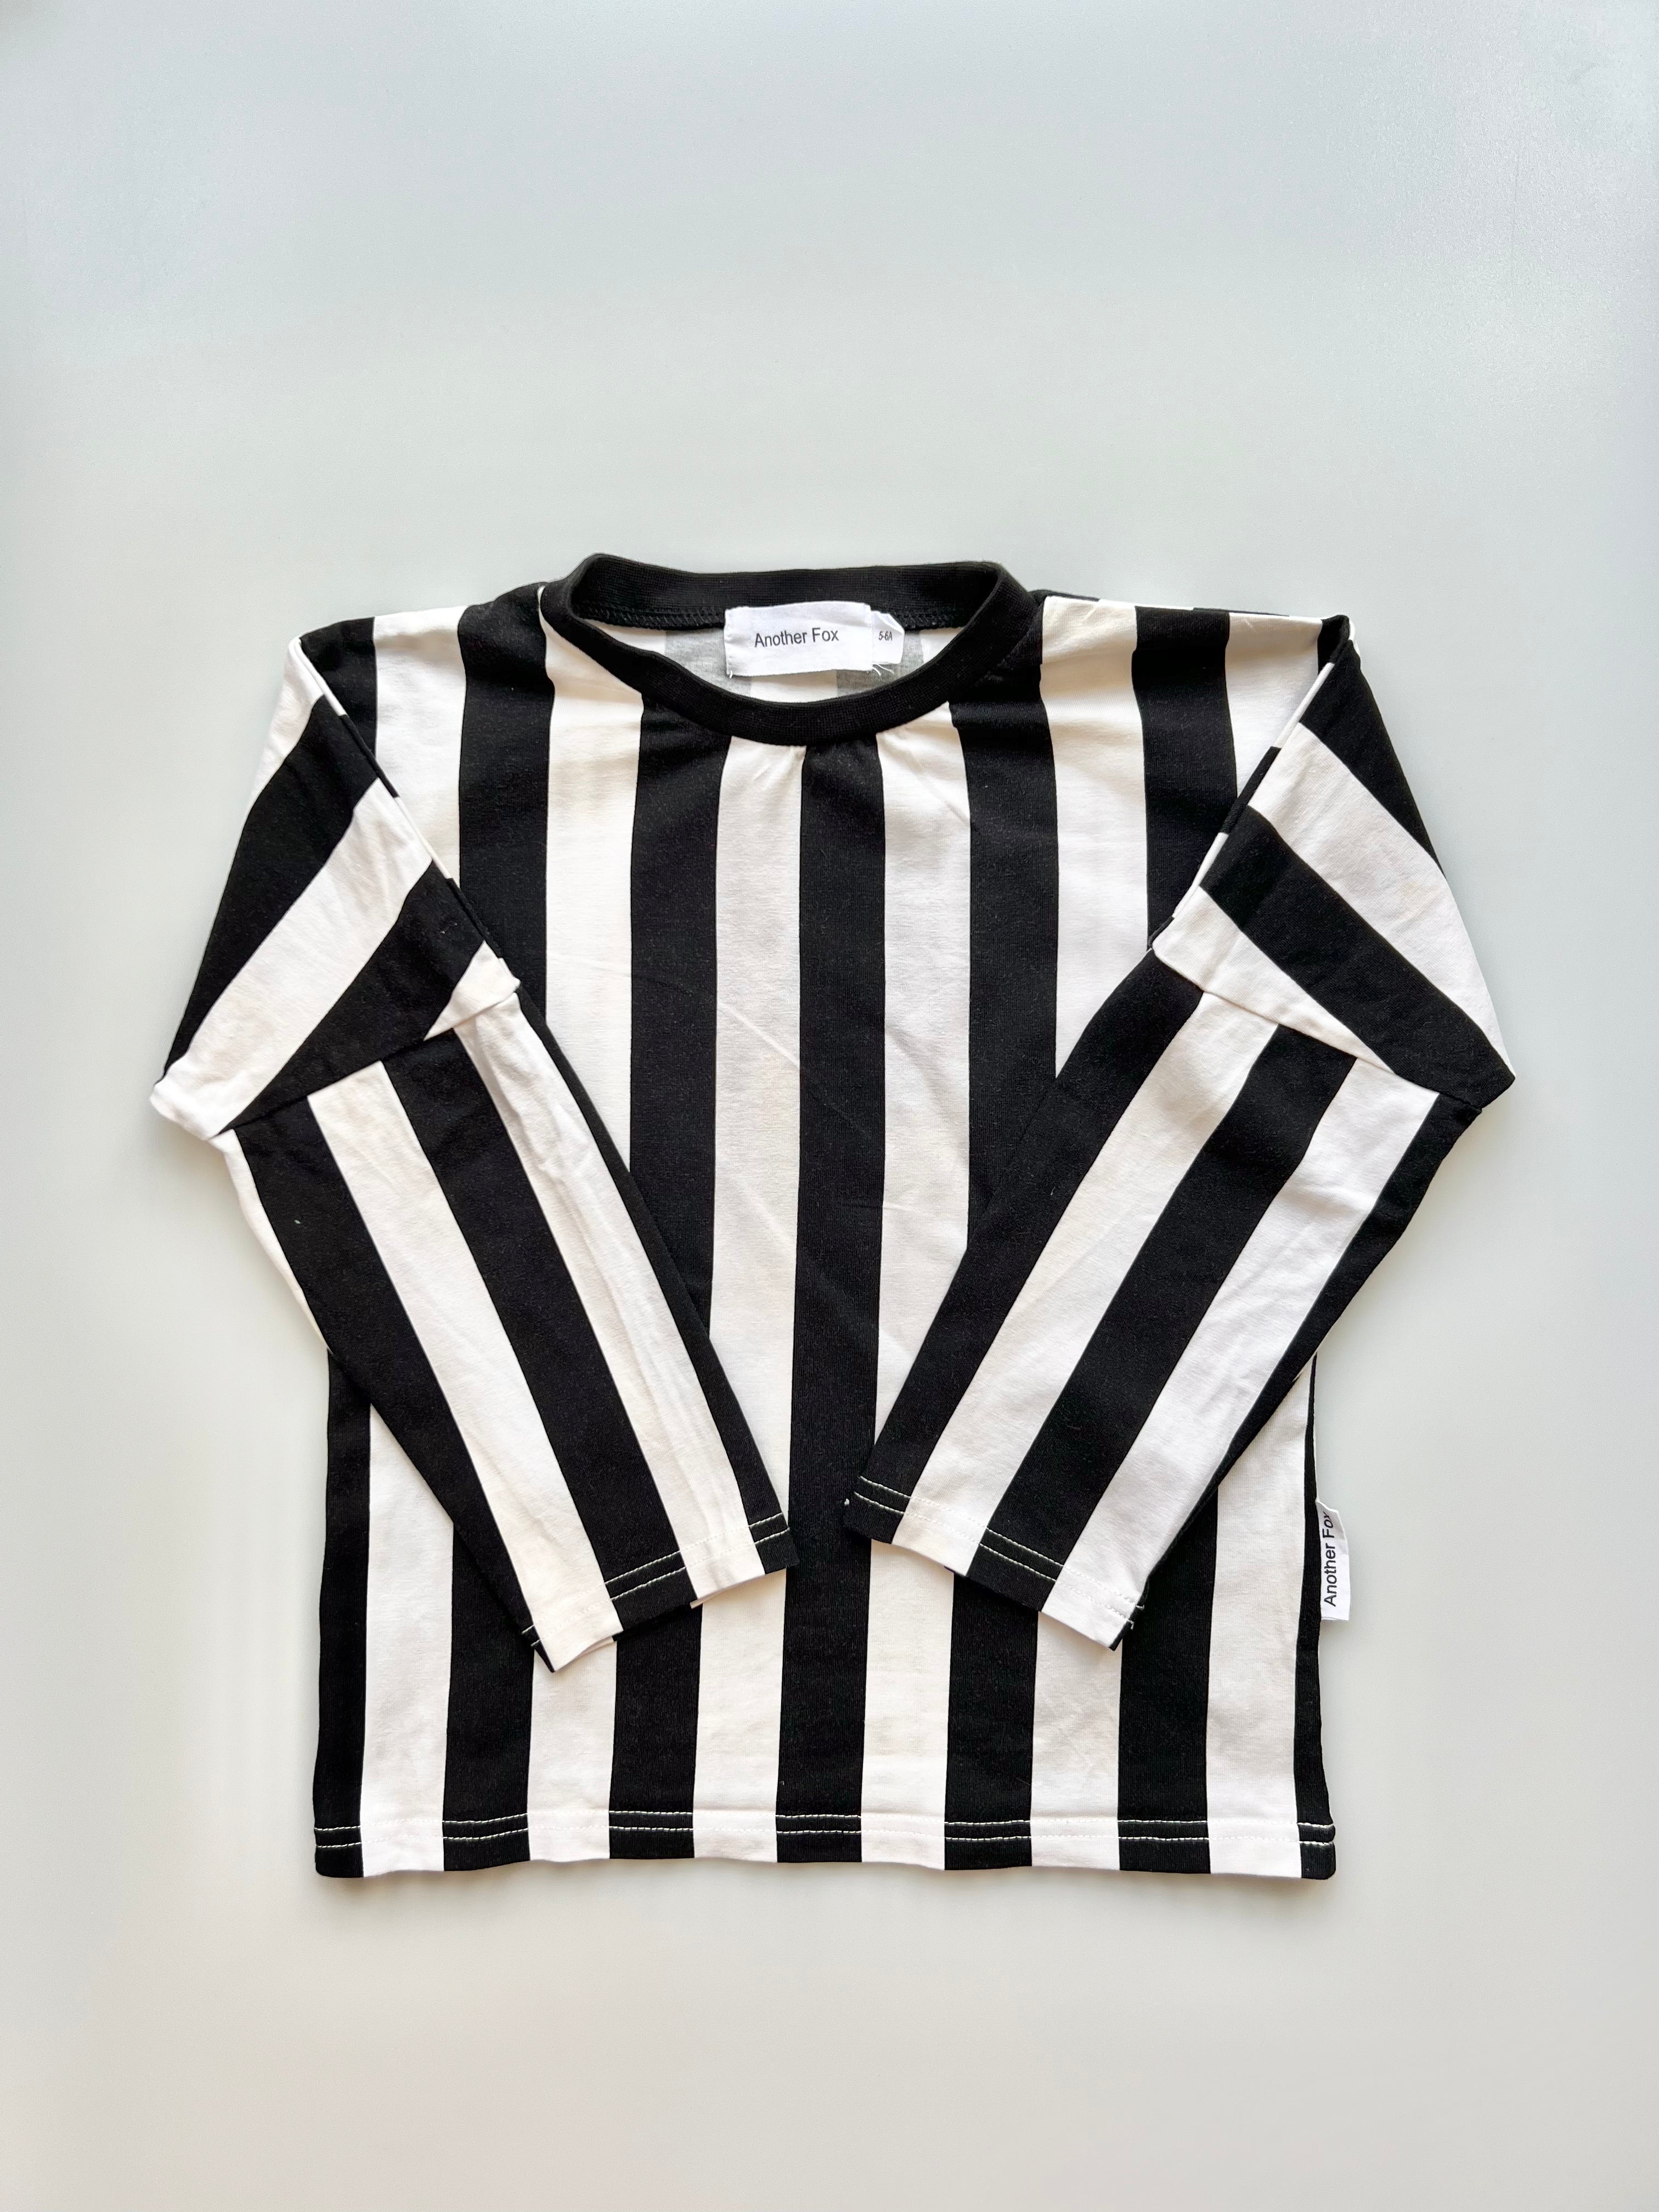 Another Fox Stripe Tee Shirt Age 5-6